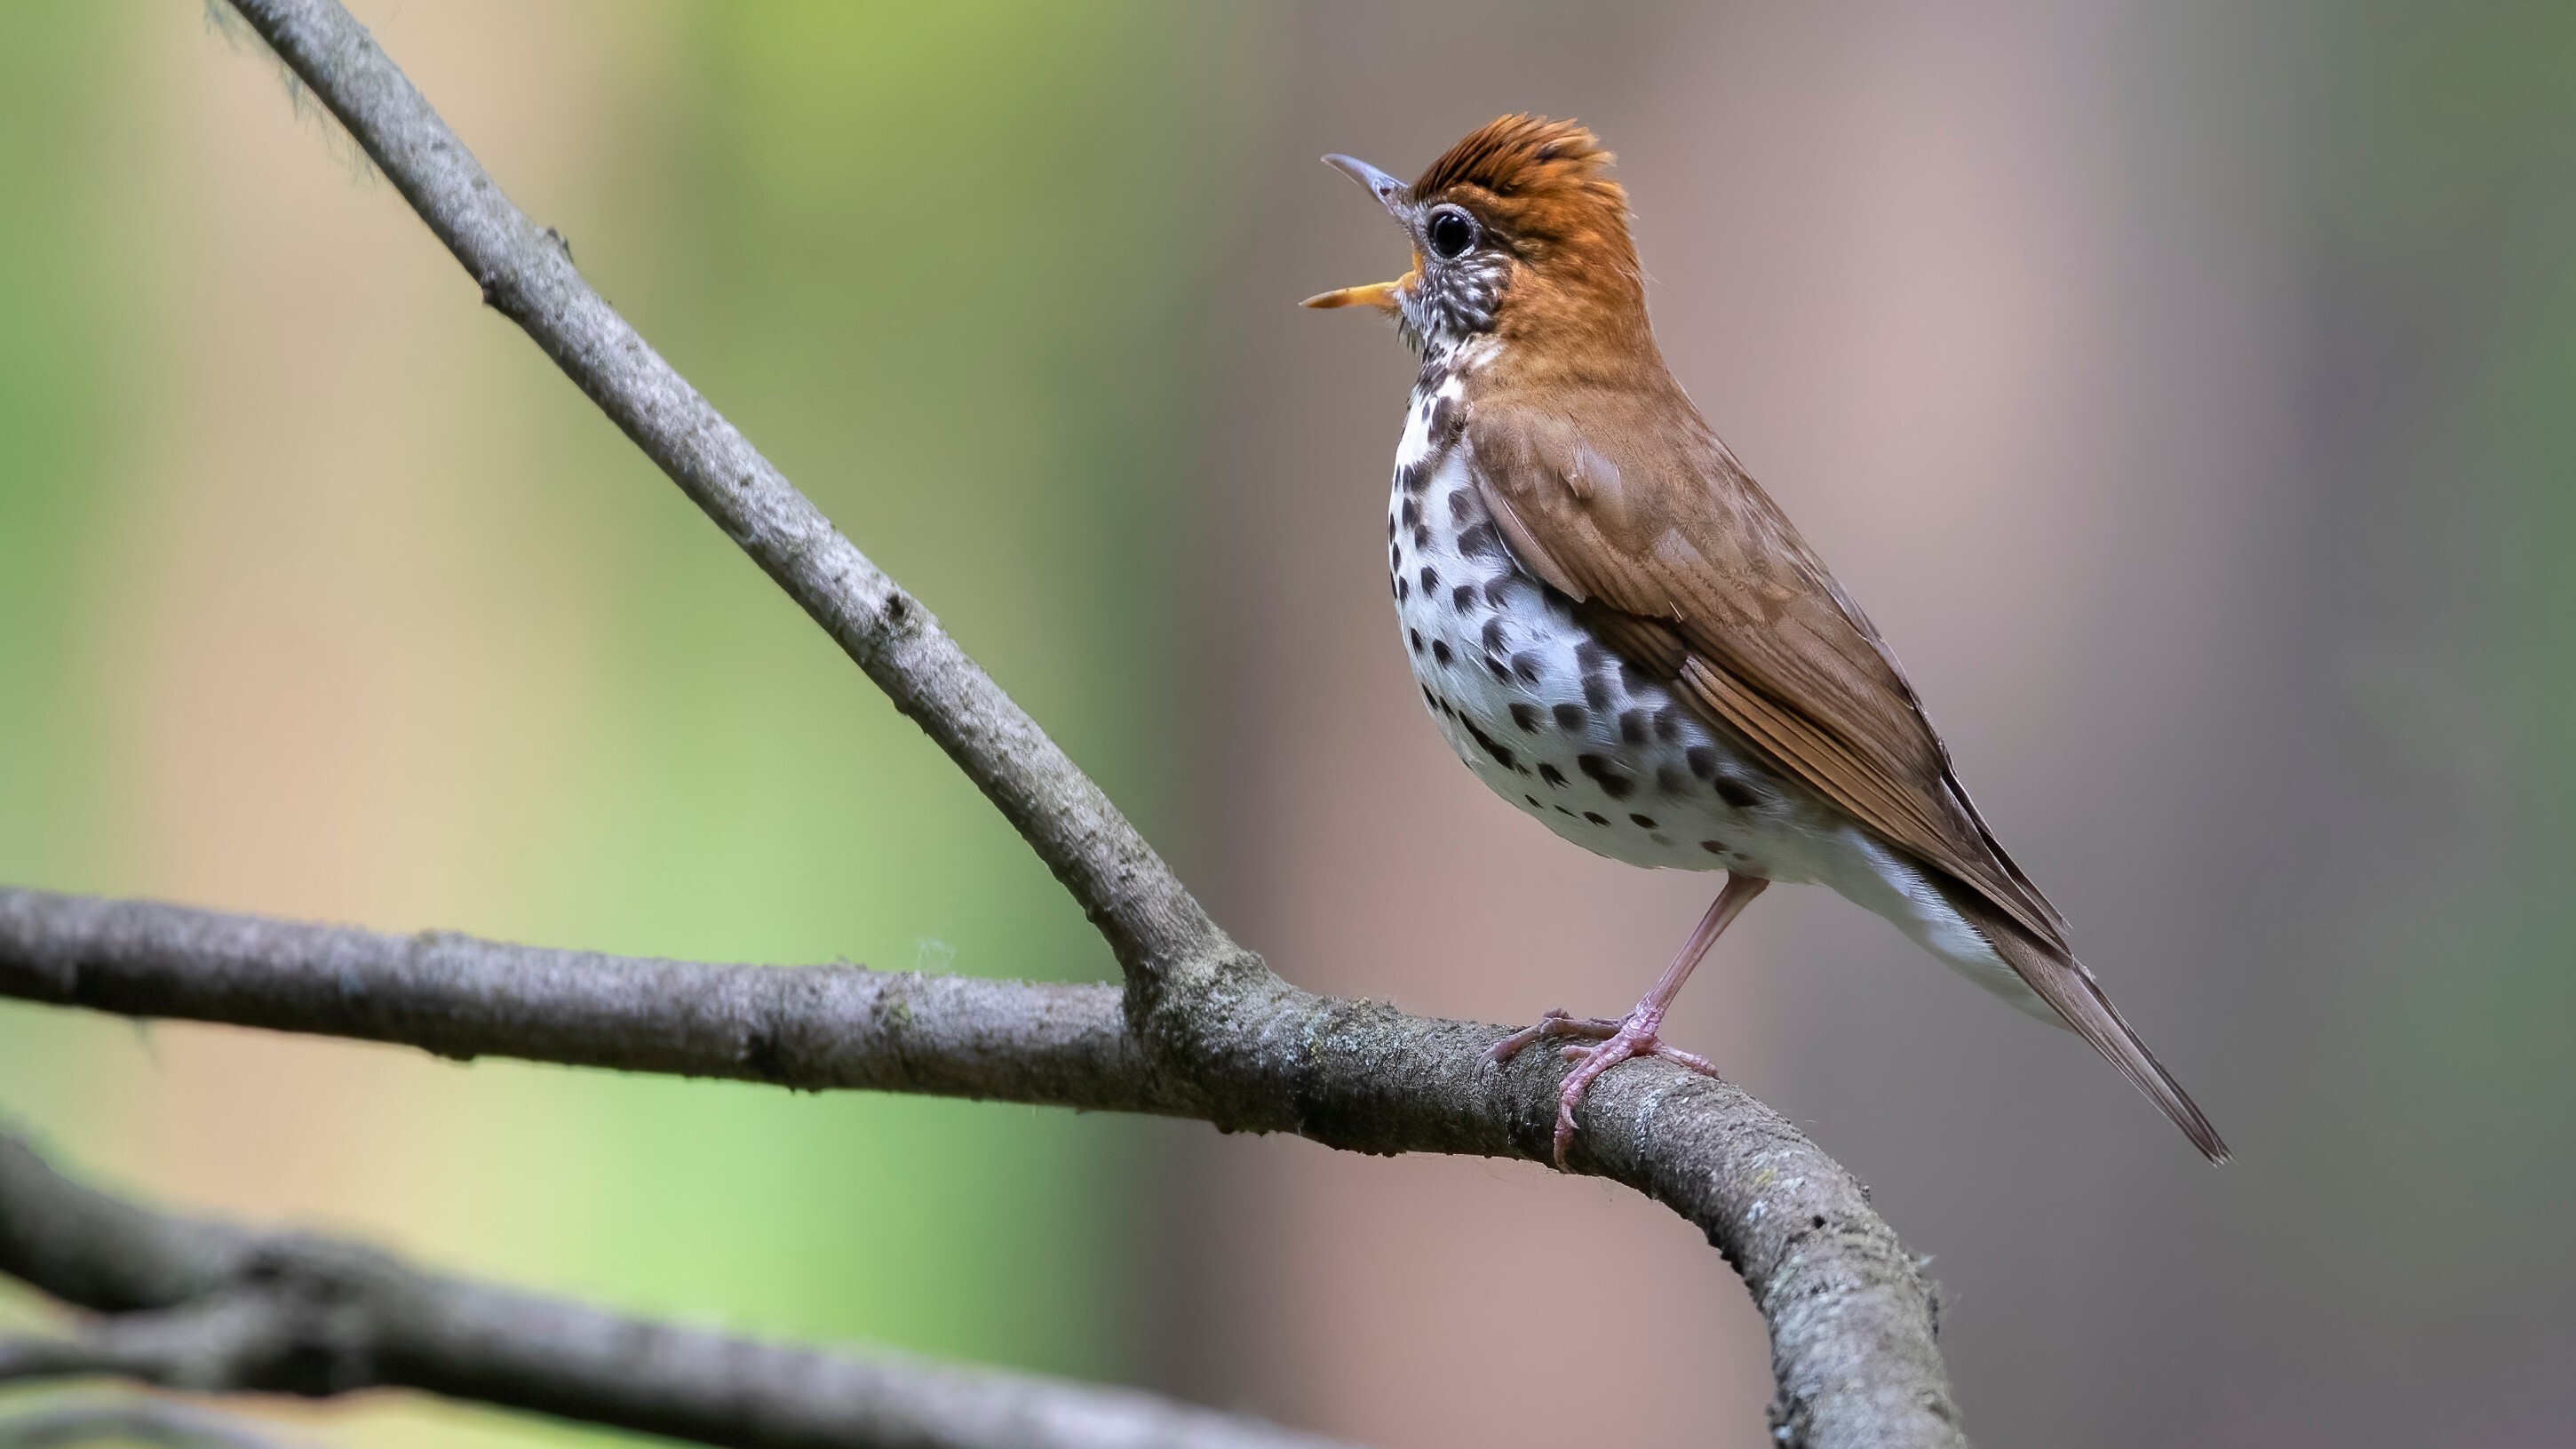 The Wood Thrush’s double voice box is the secret behind its ethereal, flute-like song. The two halves of its syrinx can produce notes independently, allowing the bird to create a symphony of sounds that blend together perfectly. Photo: Adobe Stock